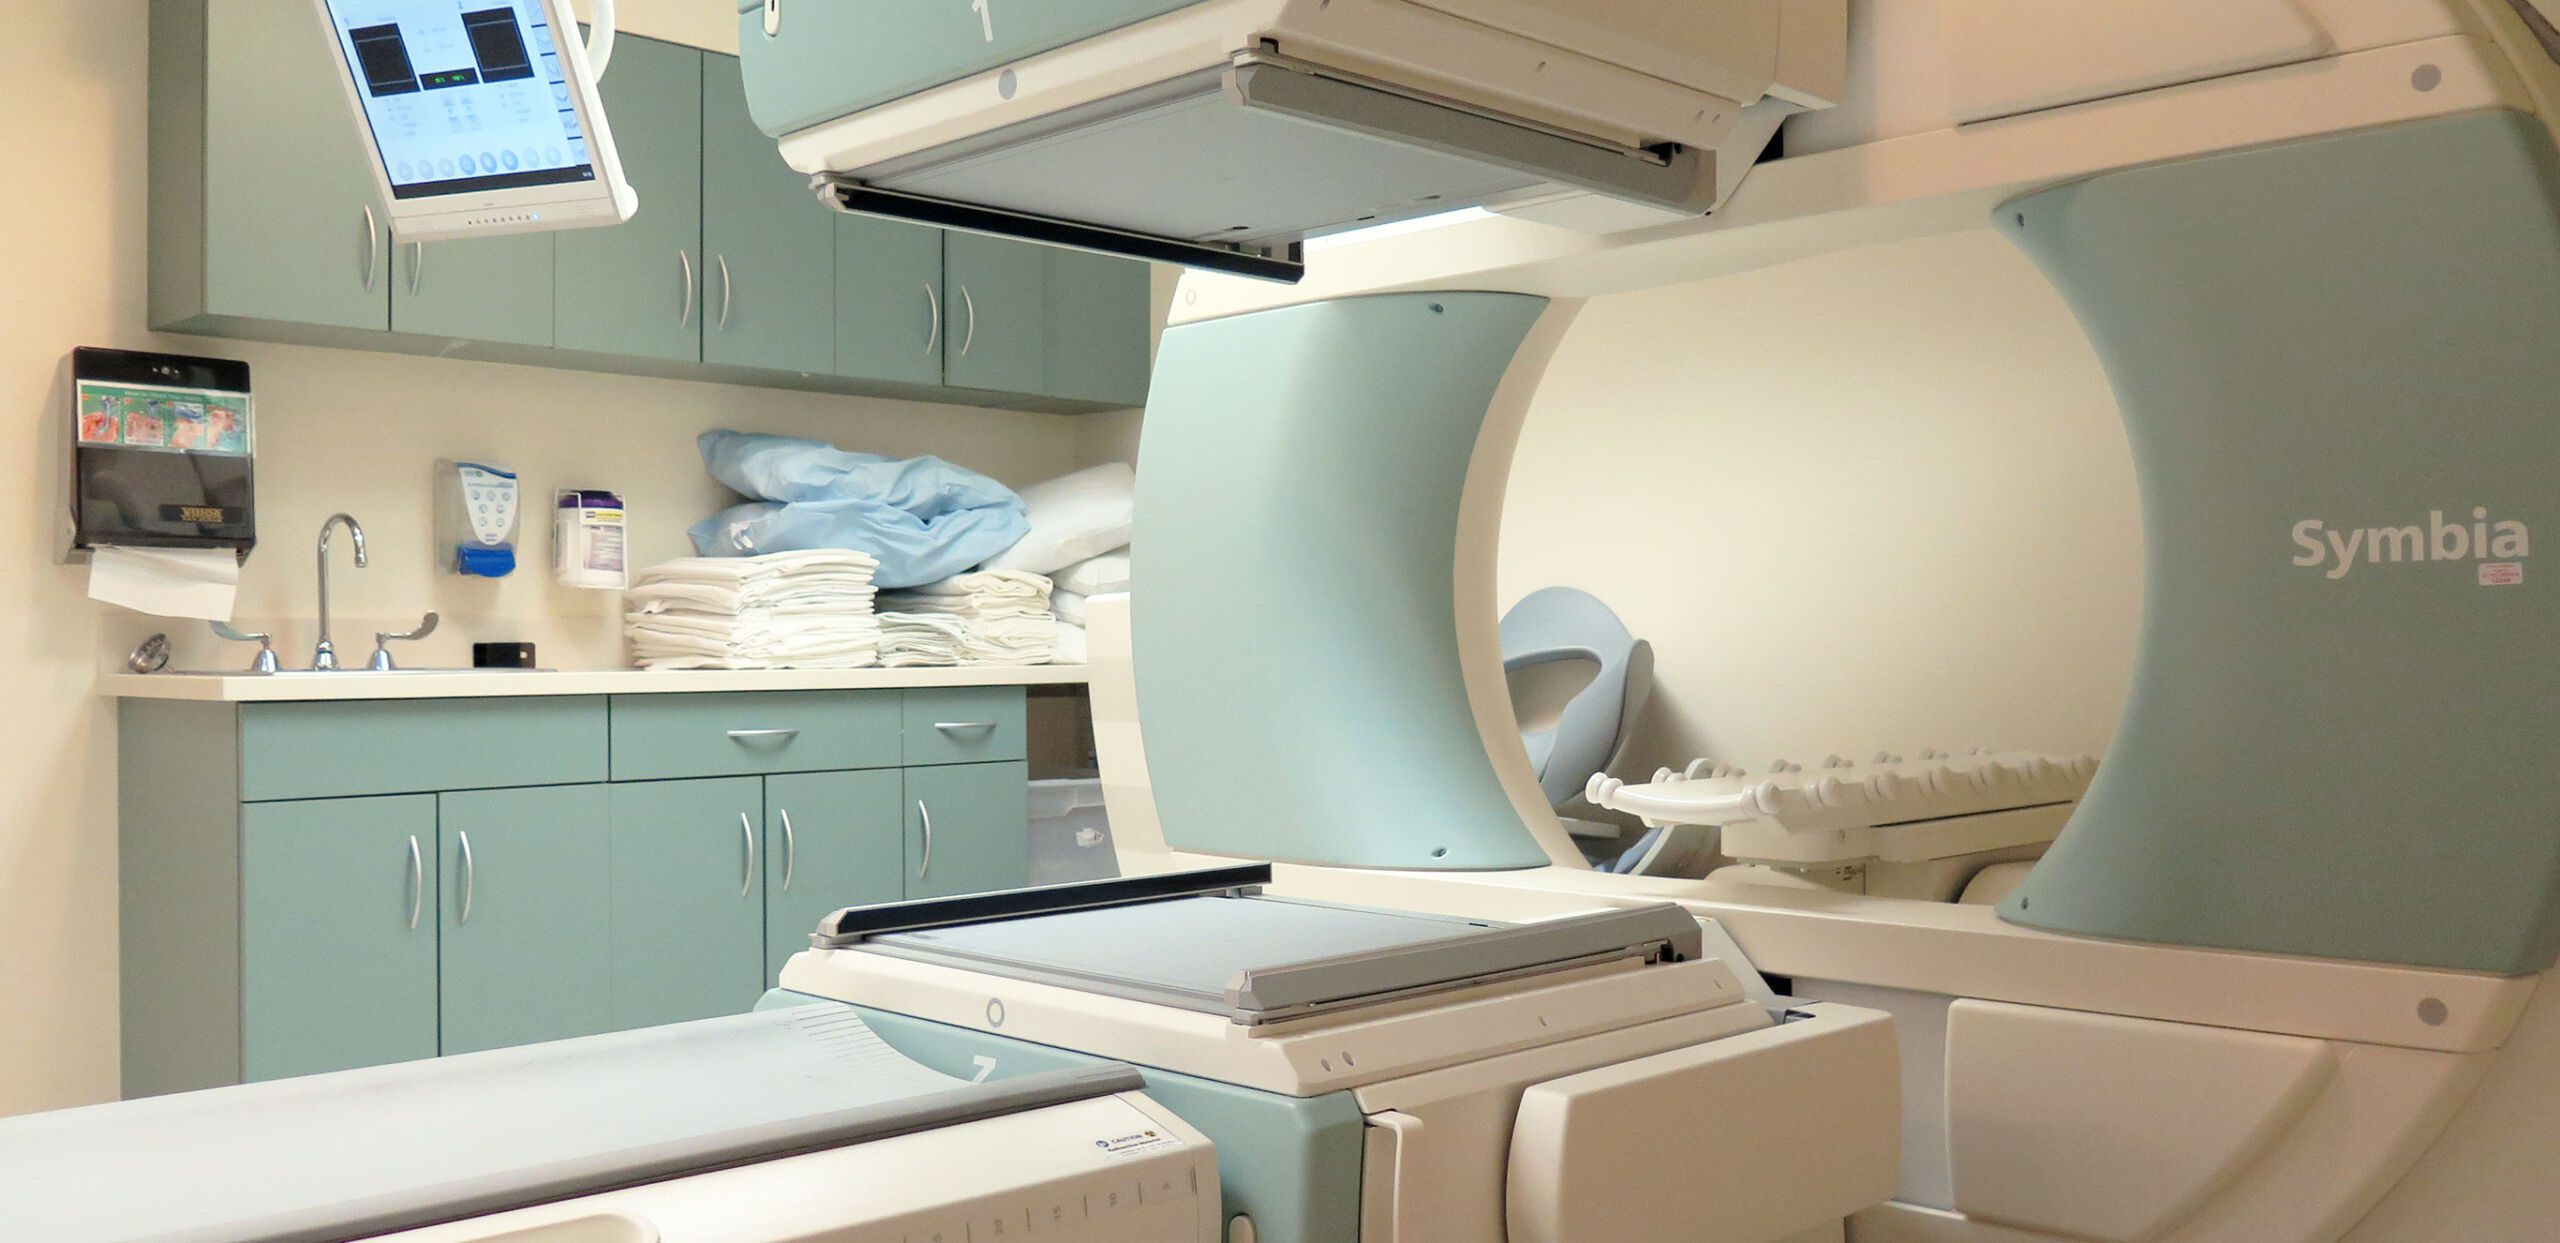 Equipment used for nuclear medicine imaging at Cooley Dickinson Hospital, 30 Locust Street, Northampton, MA 01060.